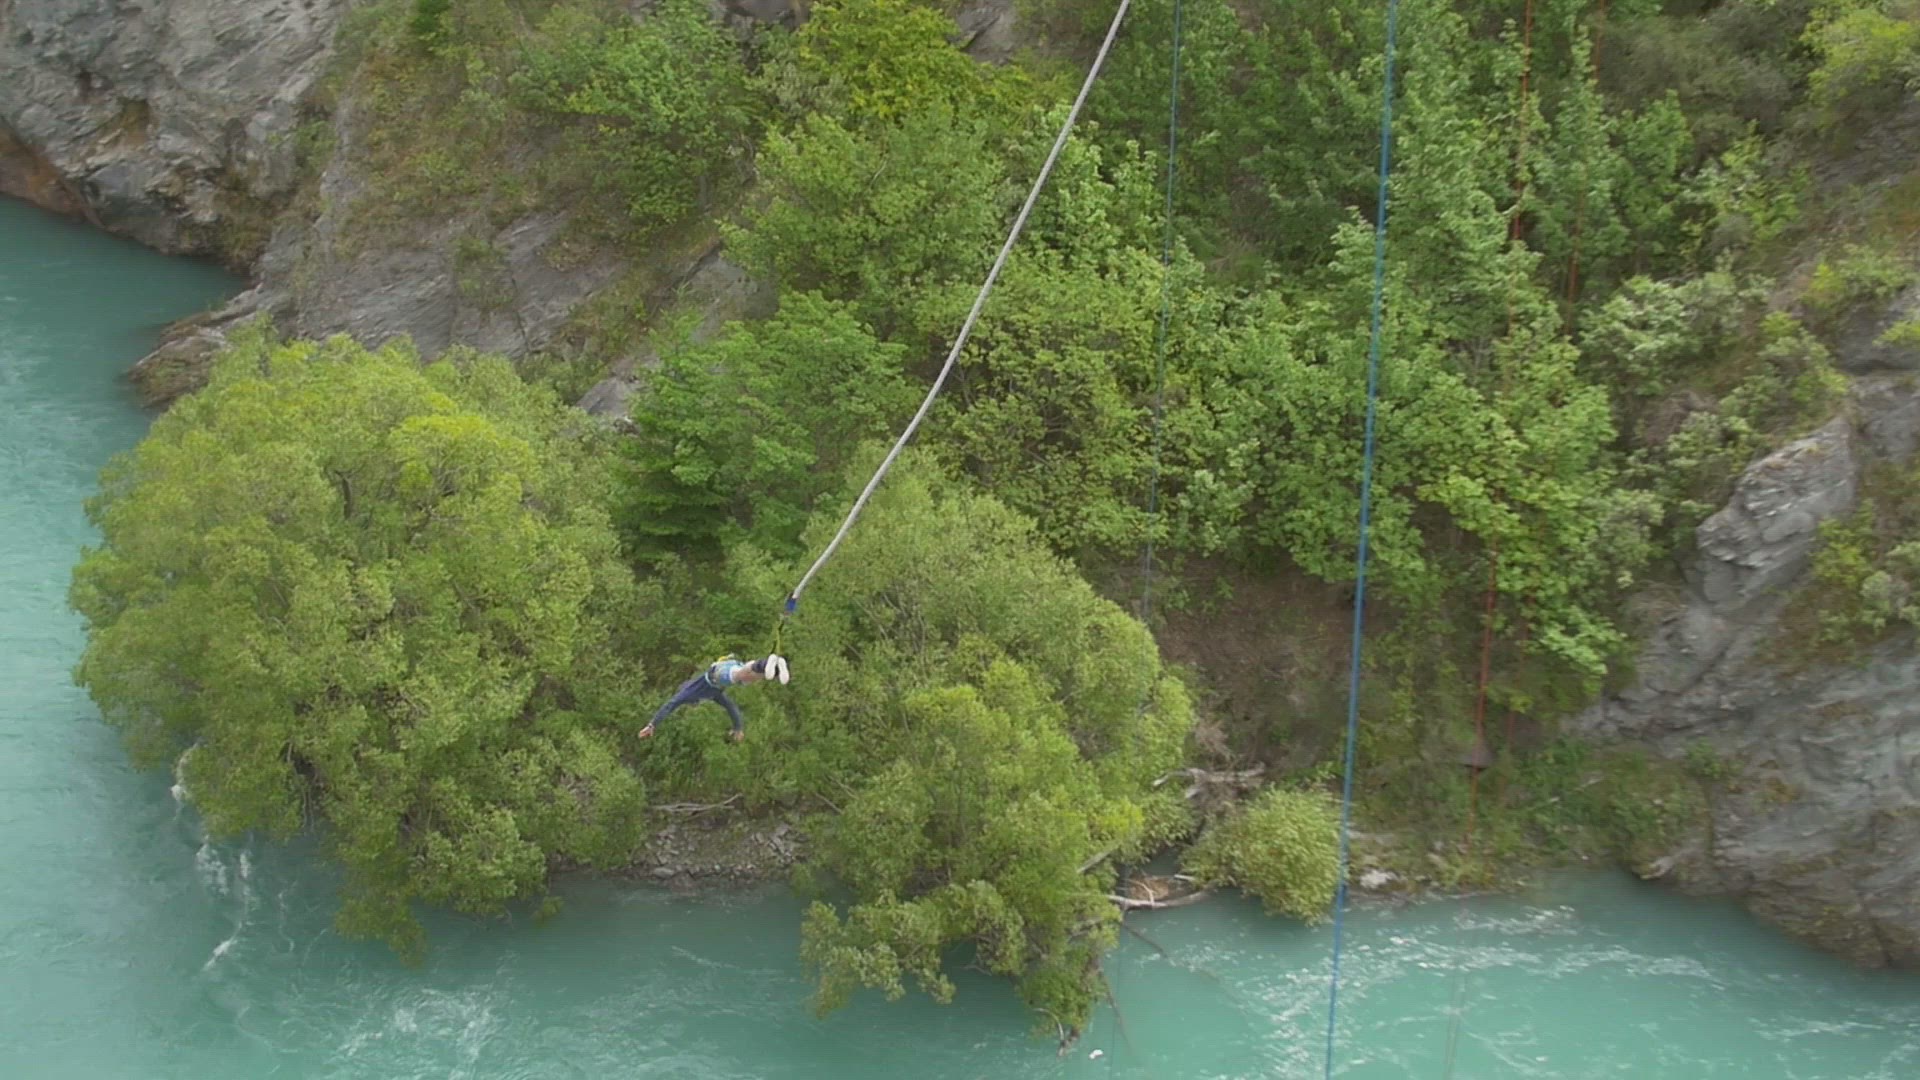 'Video thumbnail for Best Spots for Bungee Jumping in the United States'